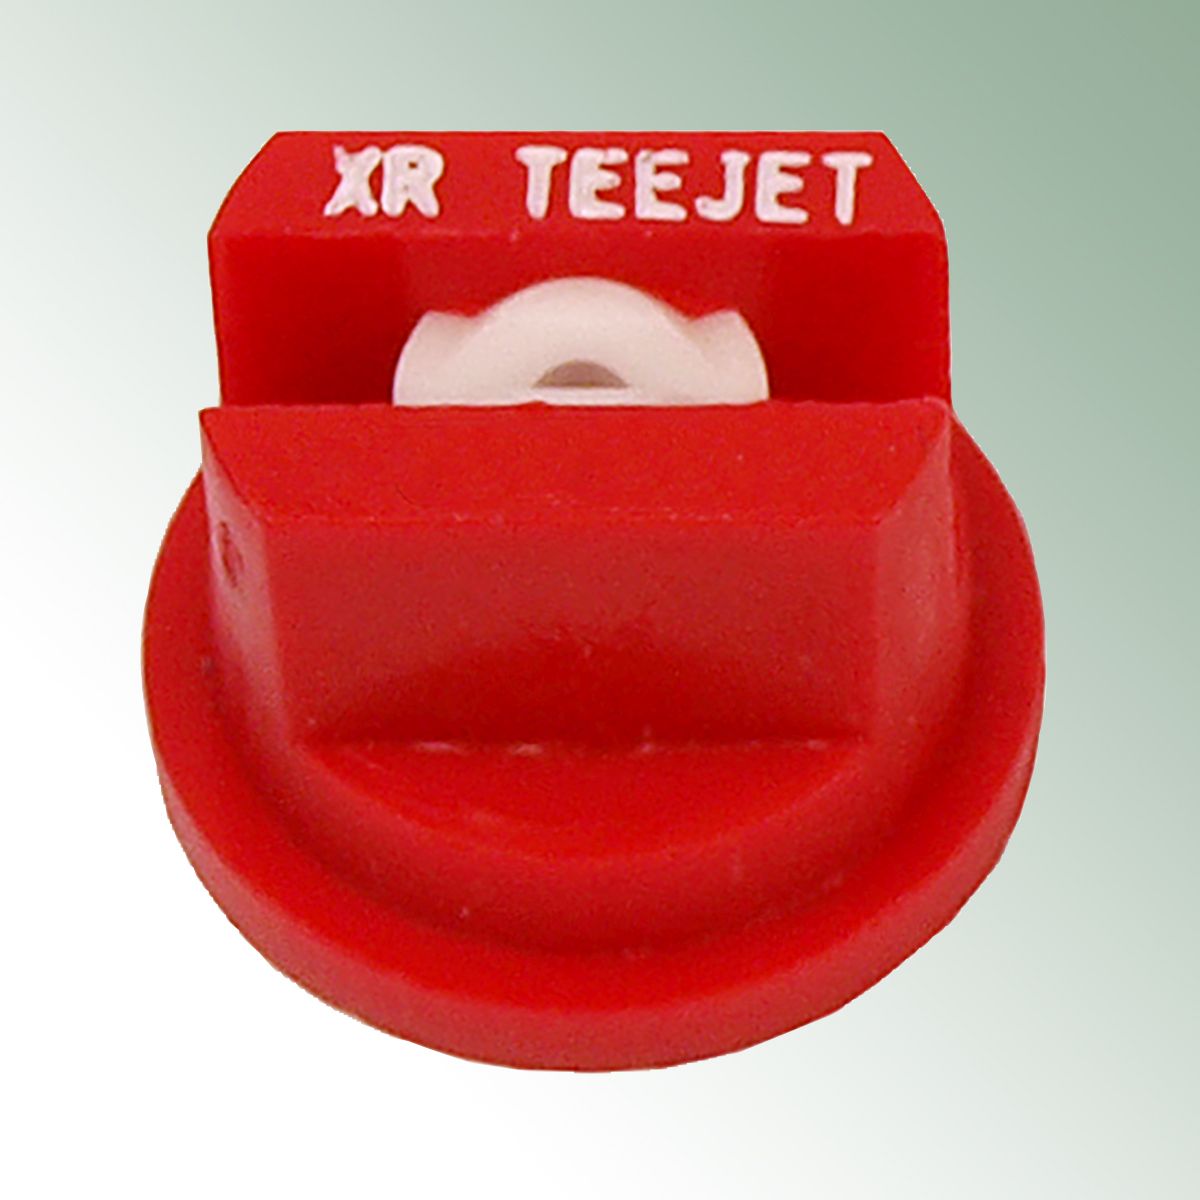 Mouth piece Red for Teejet- nozzle, Spraying angle 80° Size 04, Ceramic Insert